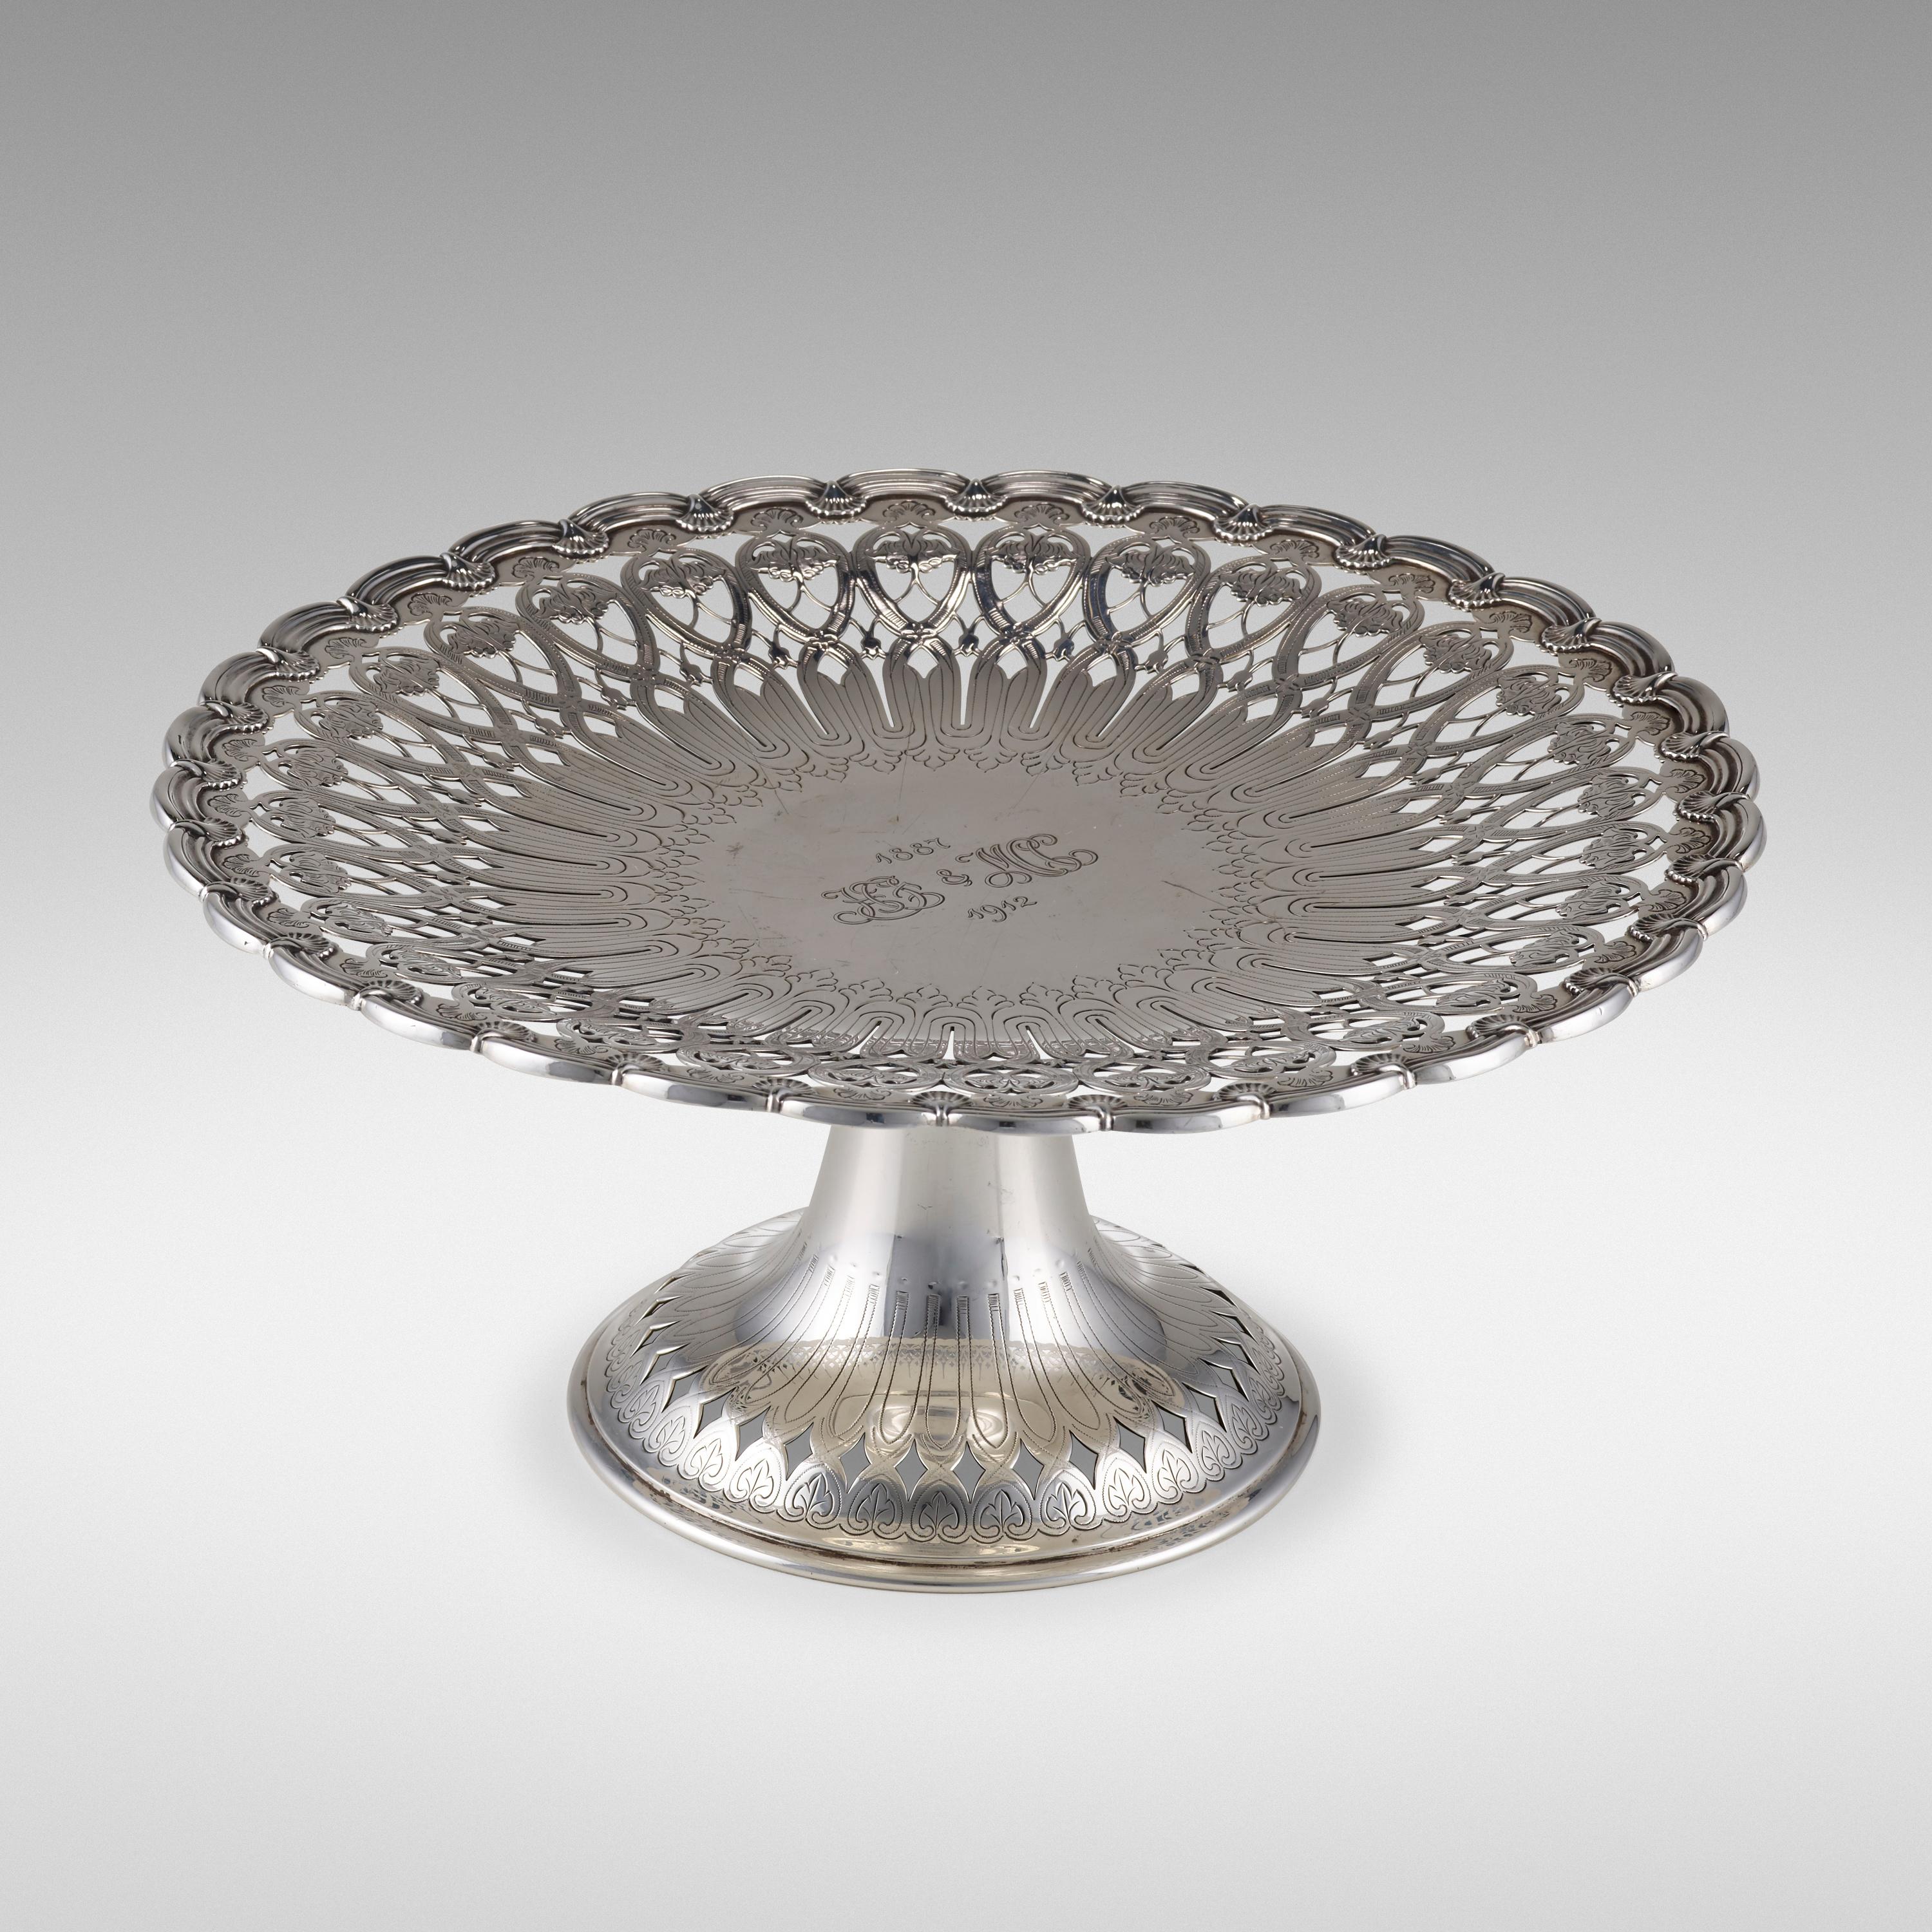 Tiffany & Co. 1907 Sterling Silver Compote Tazza Centerpiece Dish Palm Pattern 3